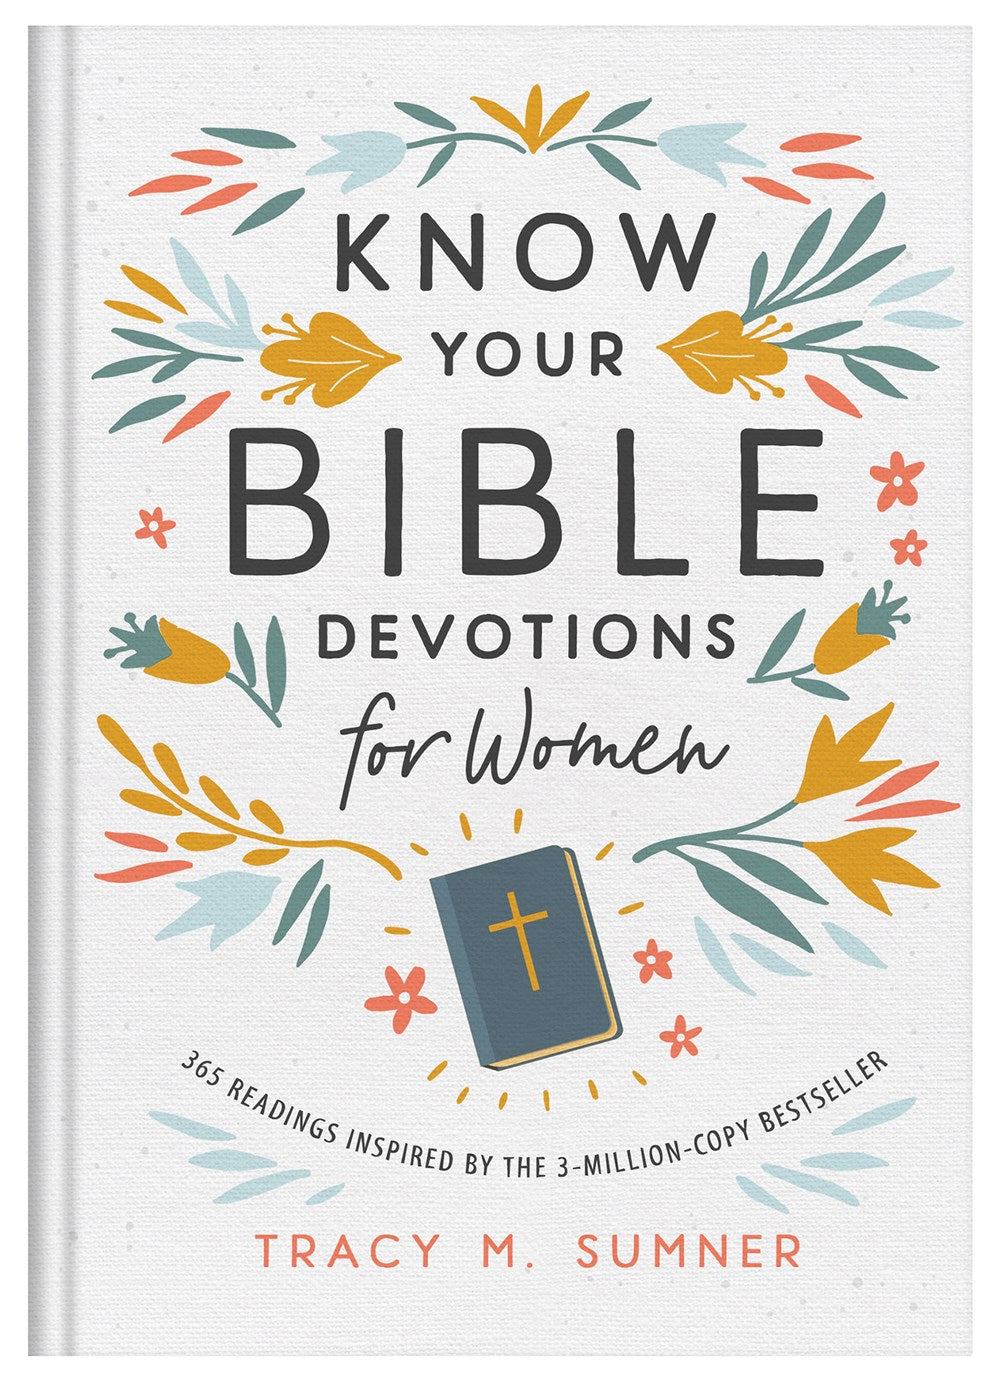 Know Your Bible Devotions for Women - The Christian Gift Company